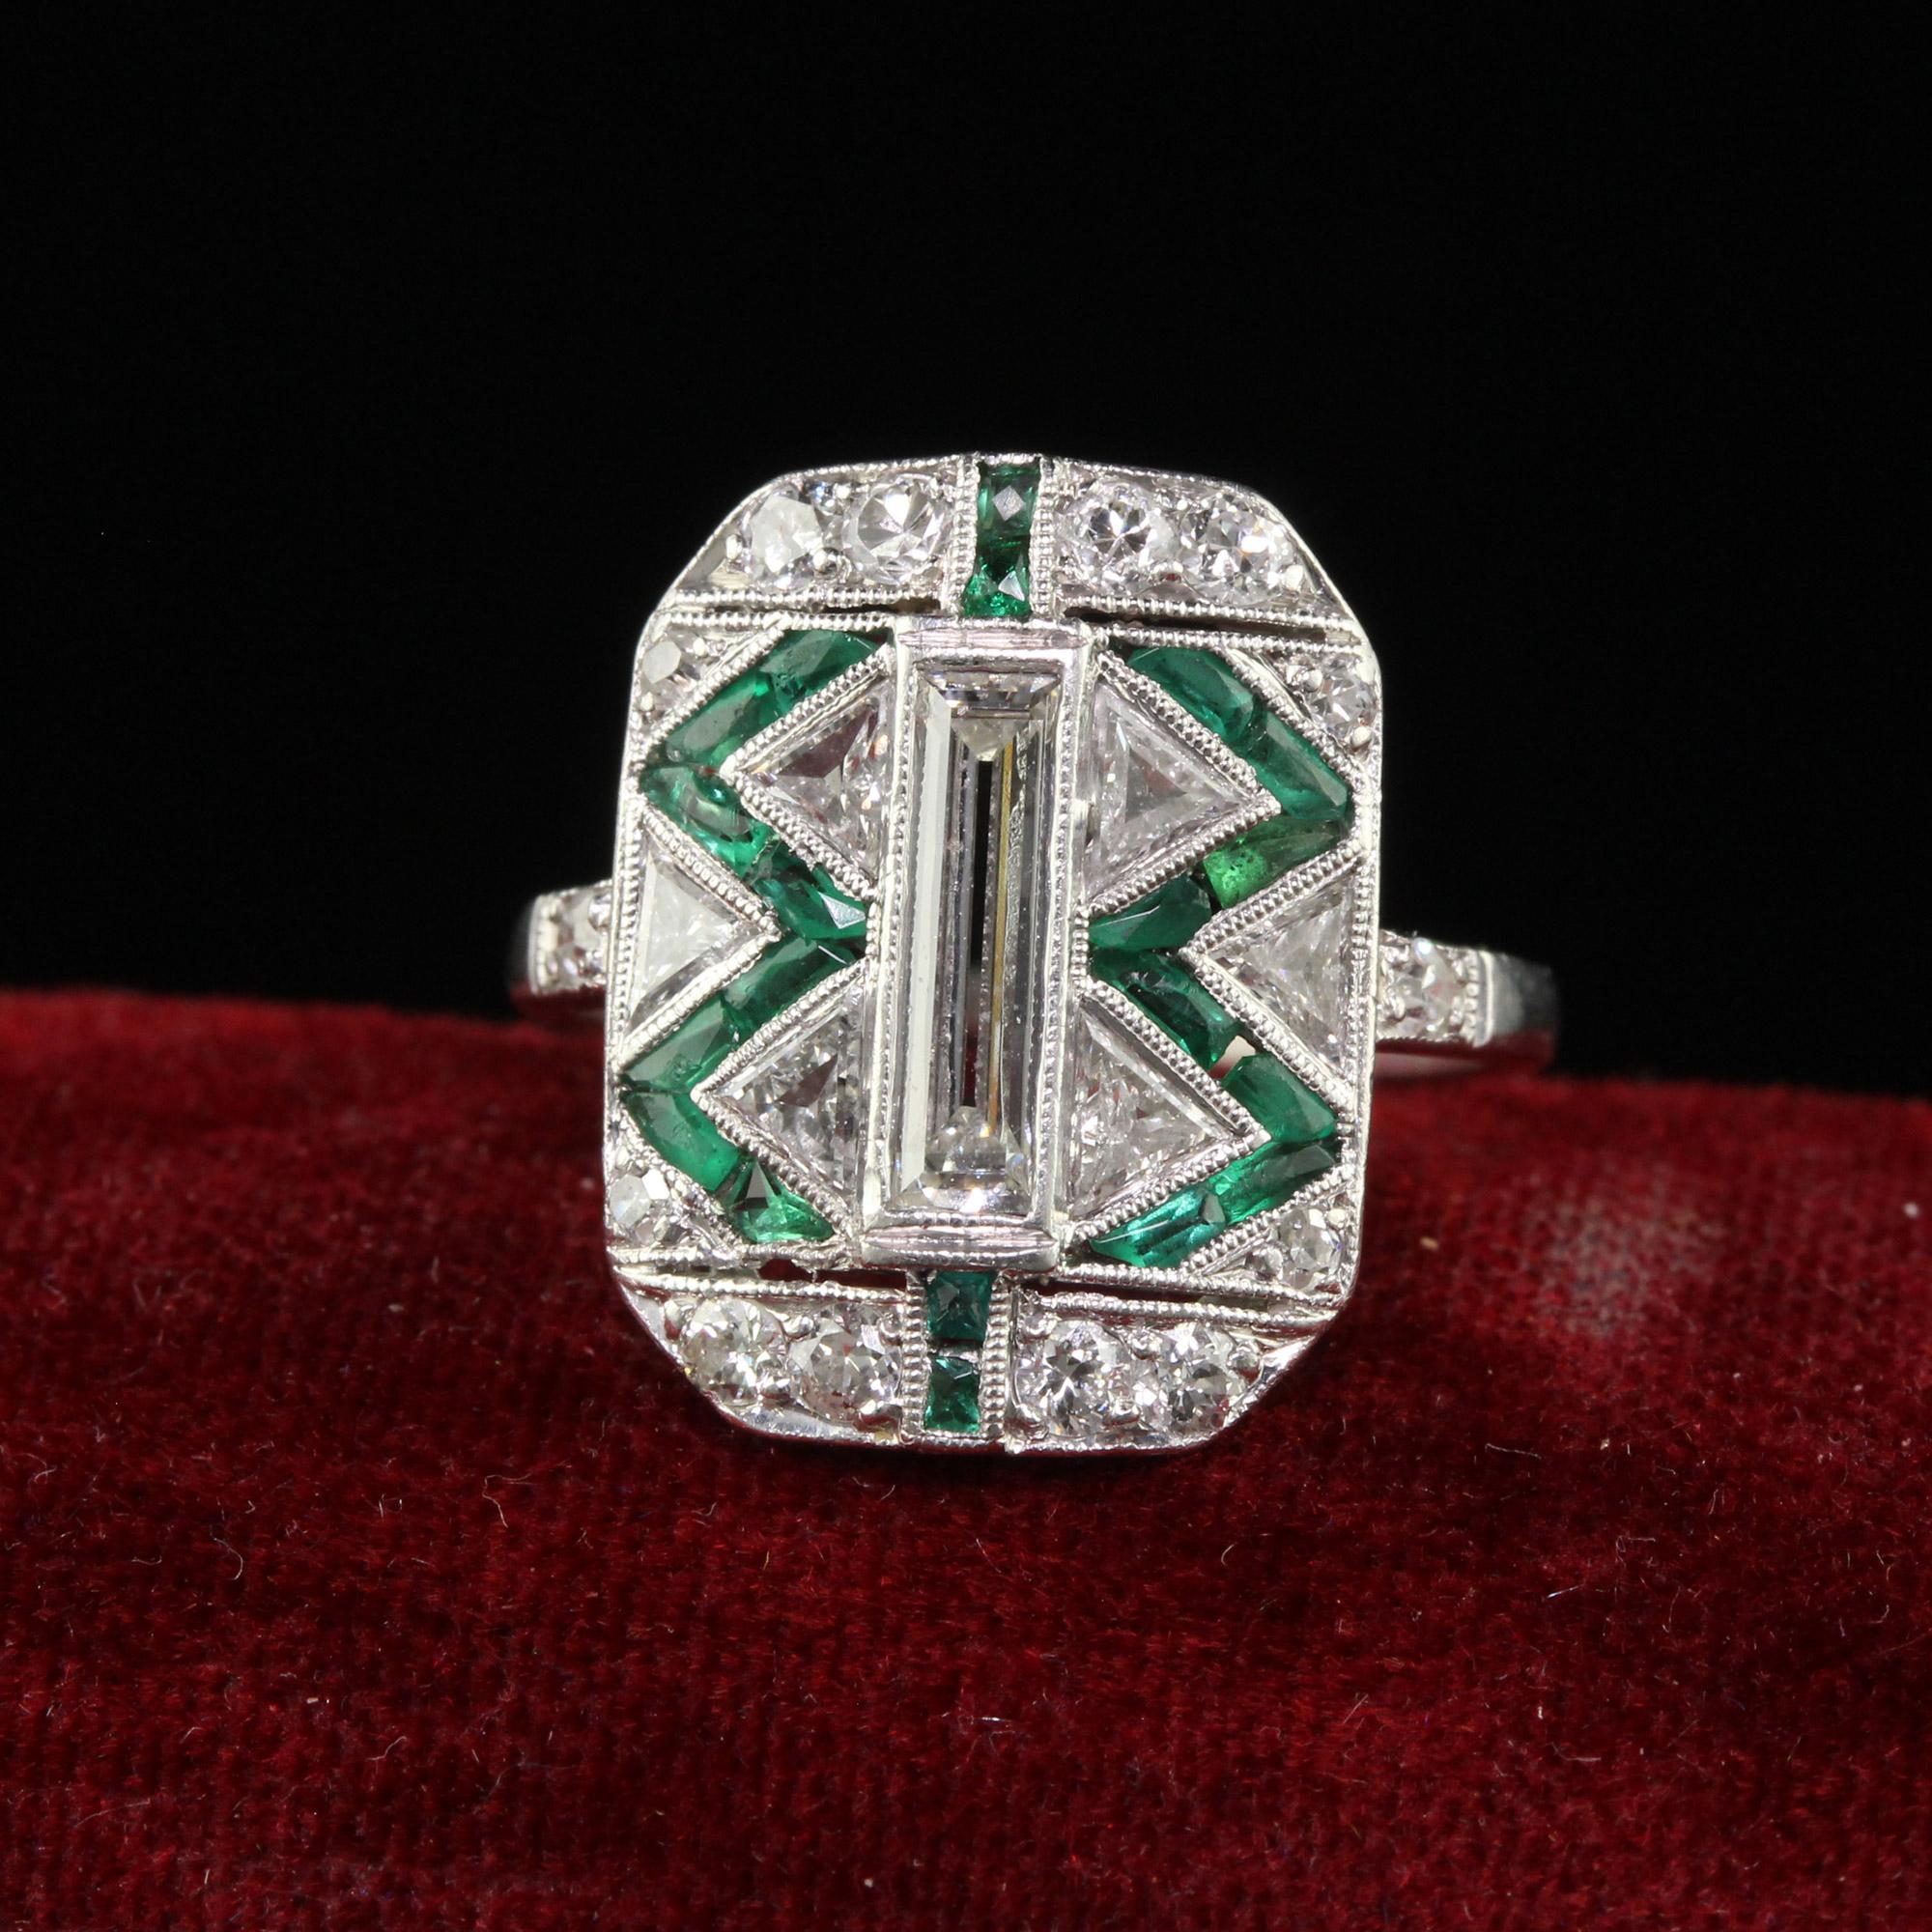 Beautiful Antique Art Deco Cartier Old Baguette Diamond and Emerald Cocktail Ring. This unbelievable Cartier ring is crafted in platinum. There is an elongated baguette cut diamond in the center with three old cut trillion cut diamonds on each side